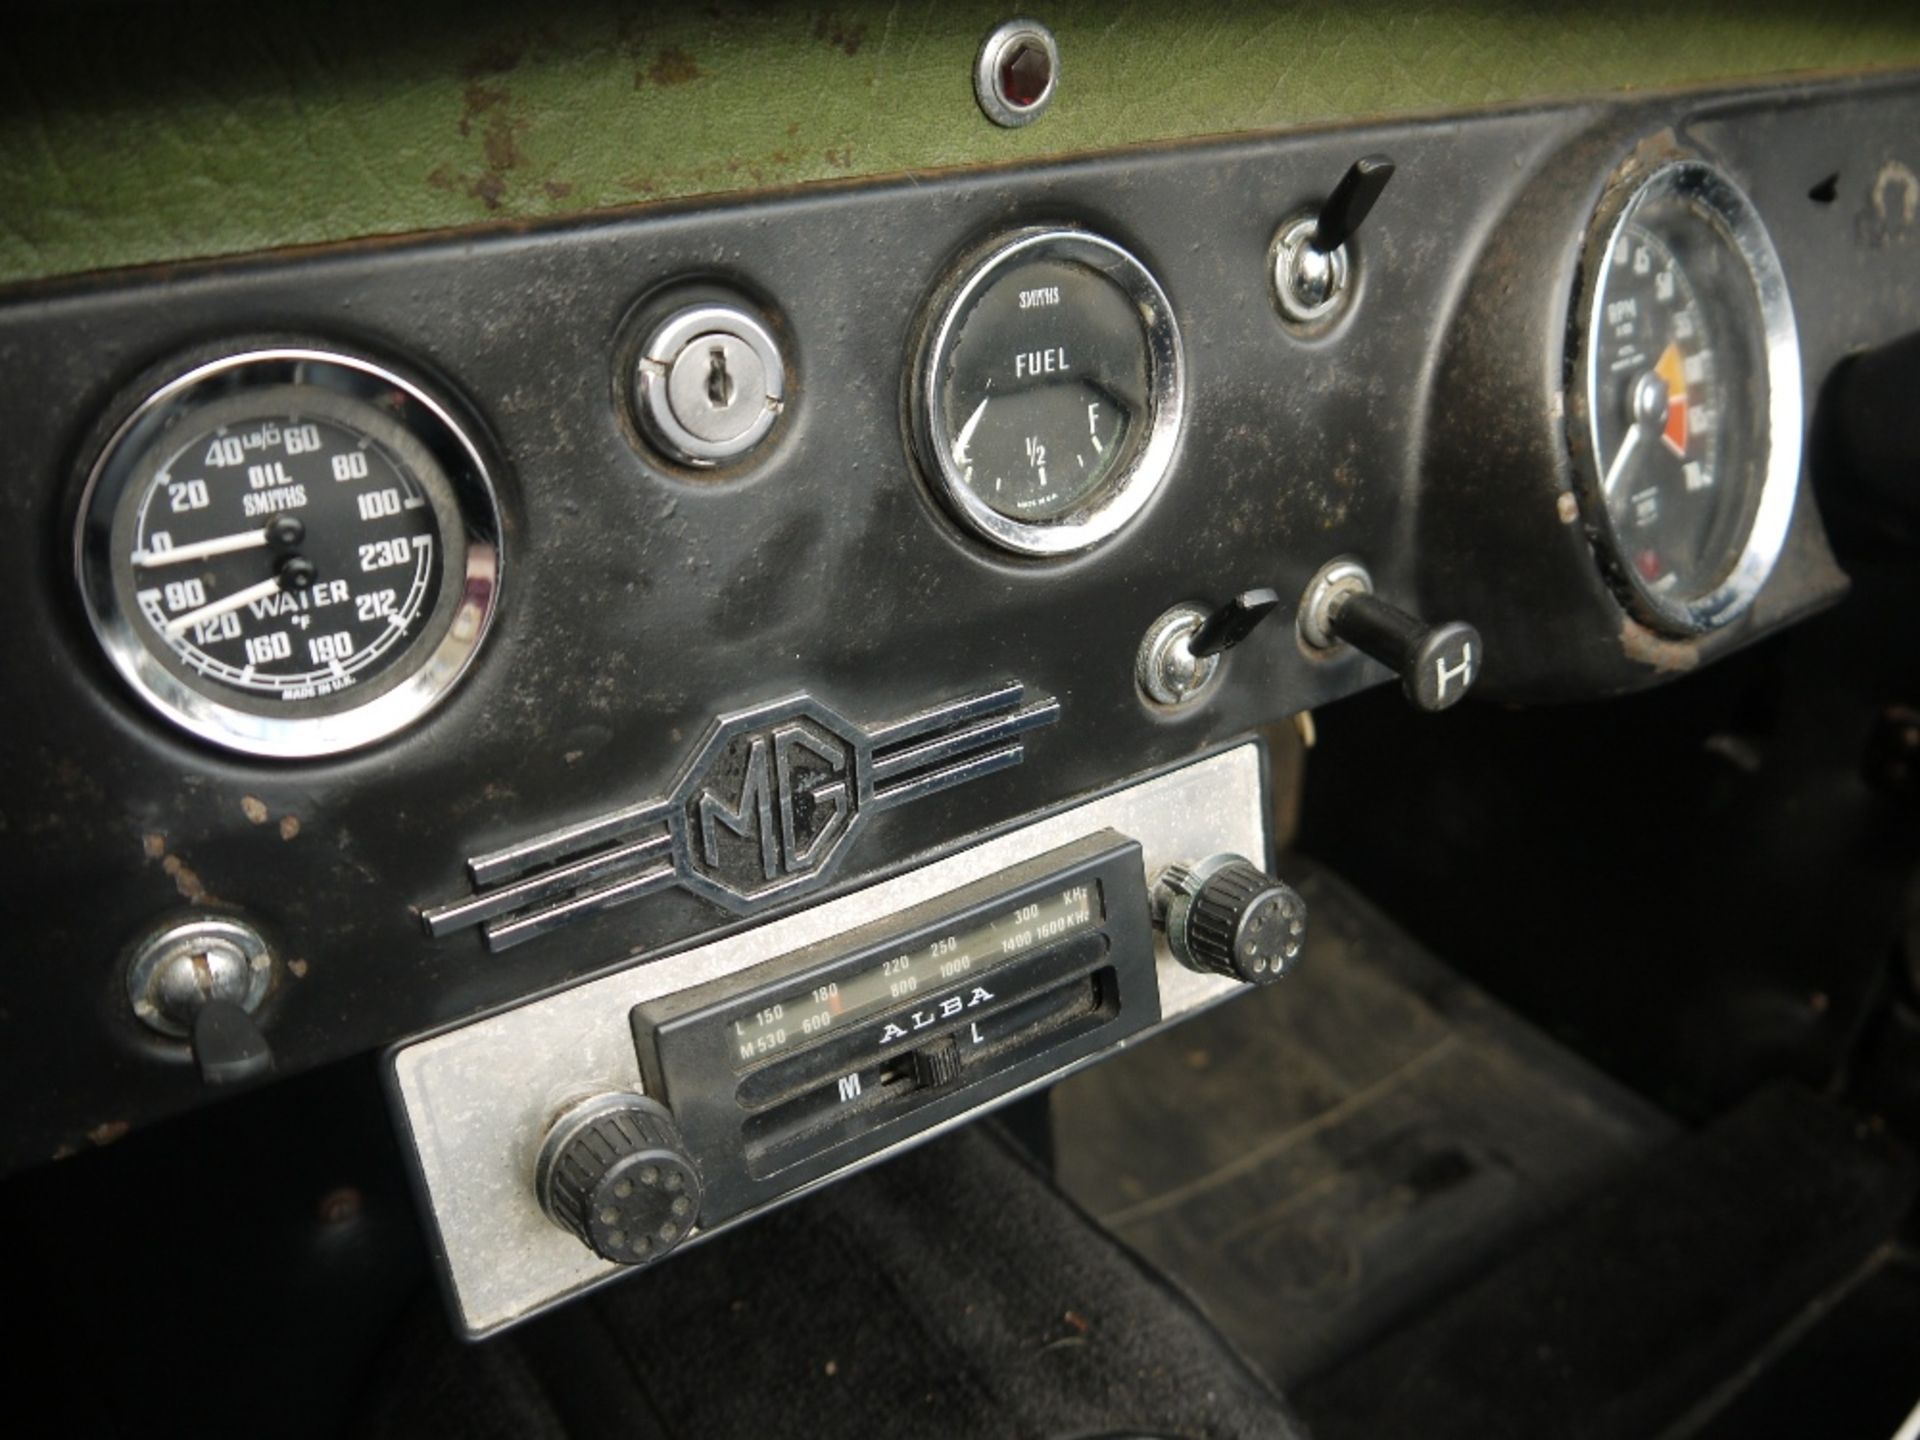 1968 MG MIDGET MARK III Registration Number: VHV 707G Chassis Number: G-AN4/67396-G Recorded - Image 20 of 21